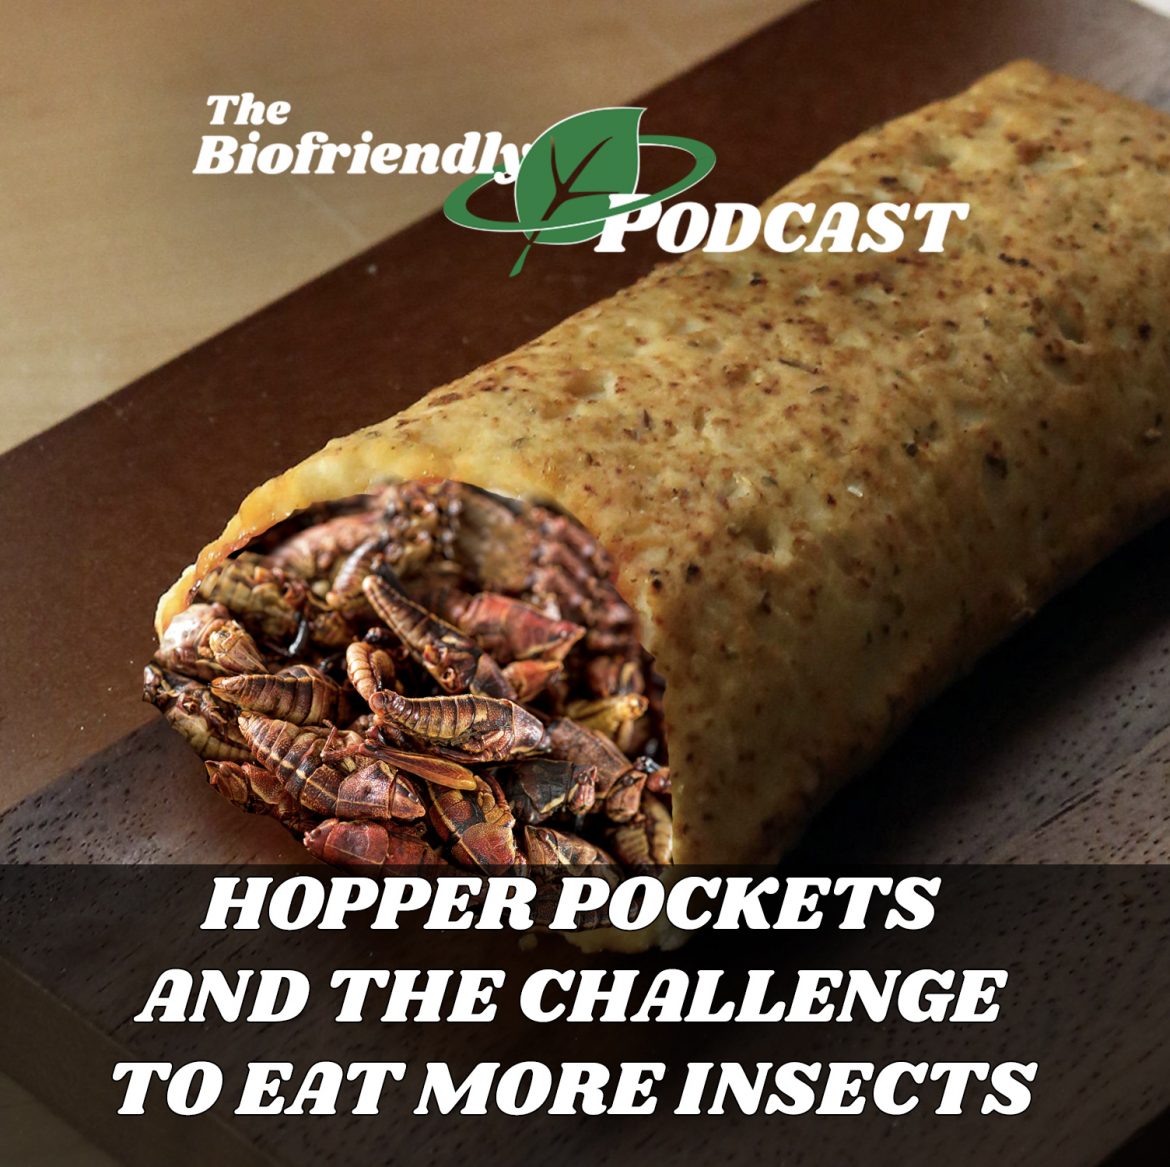 Hopper Pockets and the Challenge of Eating More Insects